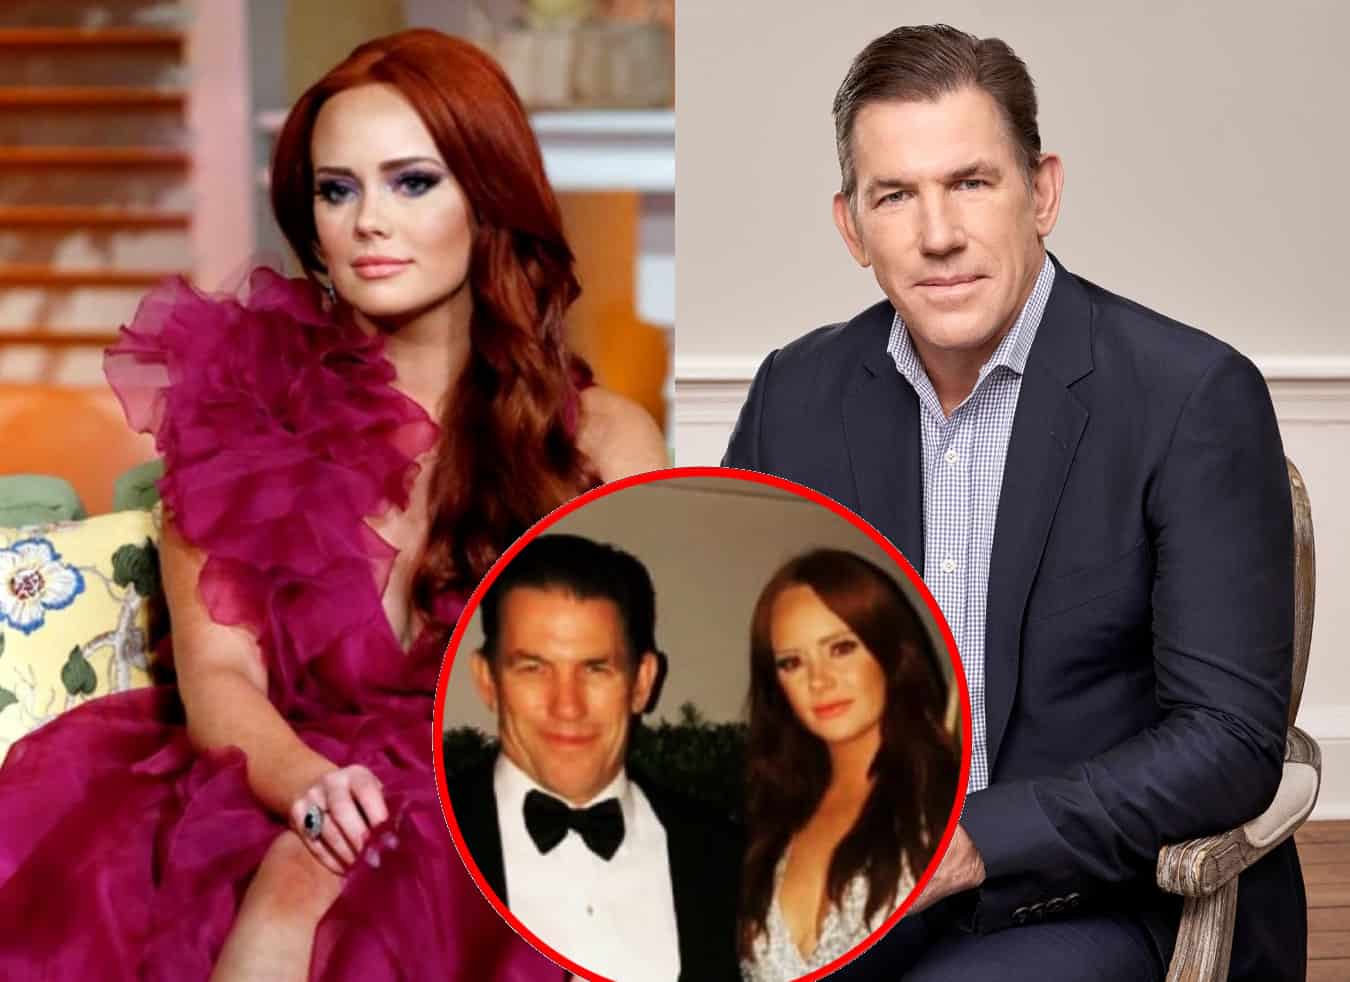 PHOTOS: Kathryn Dennis and Thomas Ravenel are Spotted Together at an Event, Are the Southern Charm Stars Back Together?